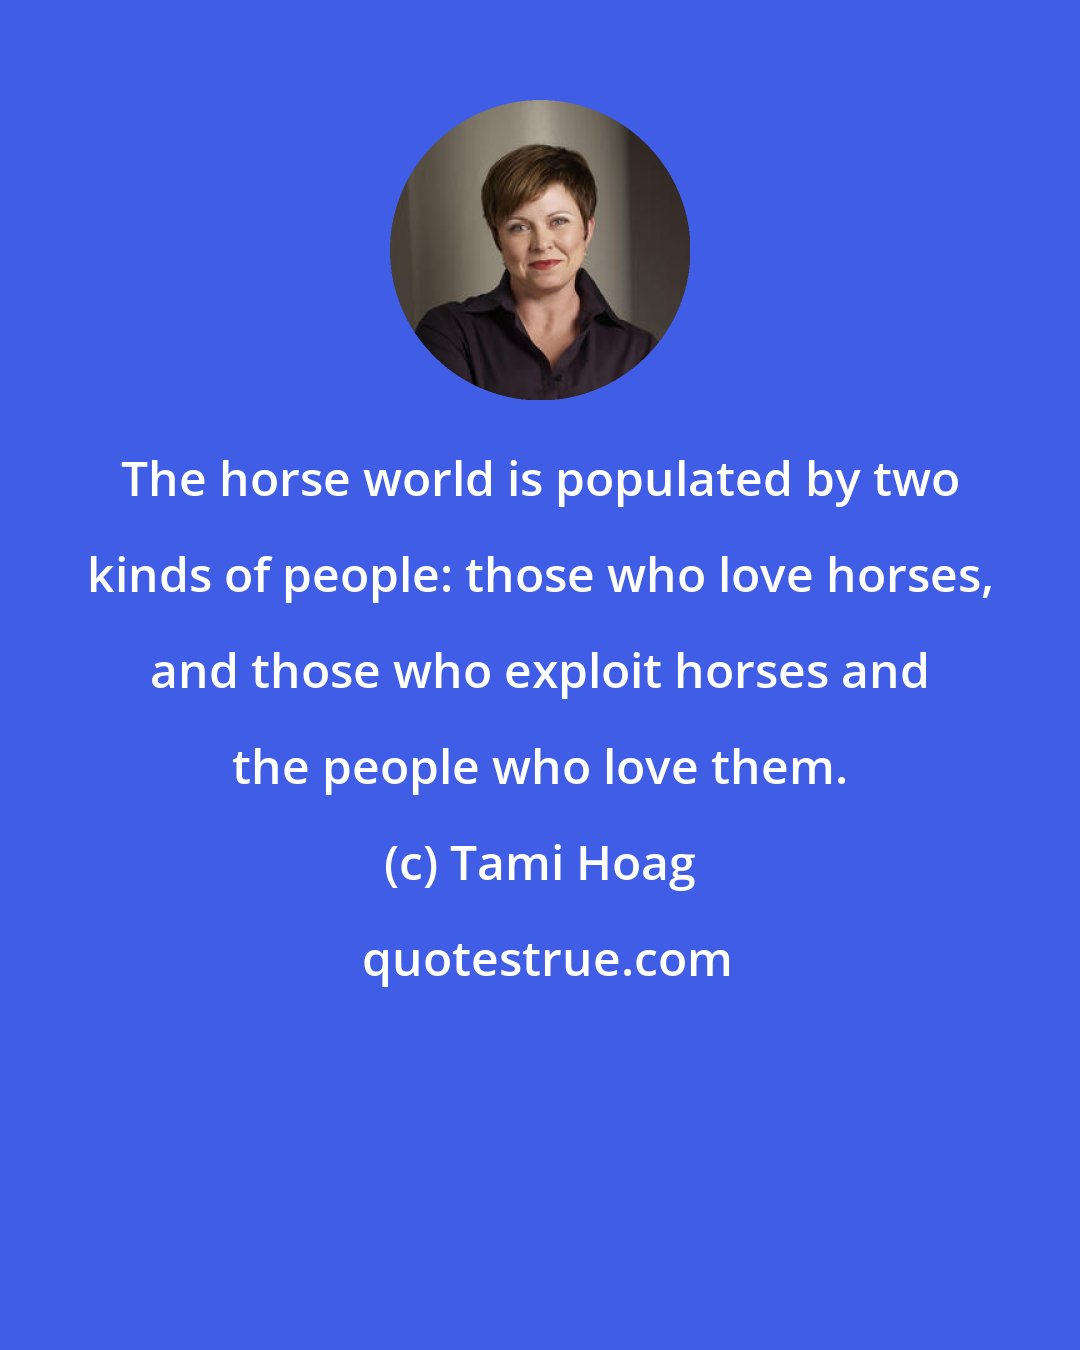 Tami Hoag: The horse world is populated by two kinds of people: those who love horses, and those who exploit horses and the people who love them.